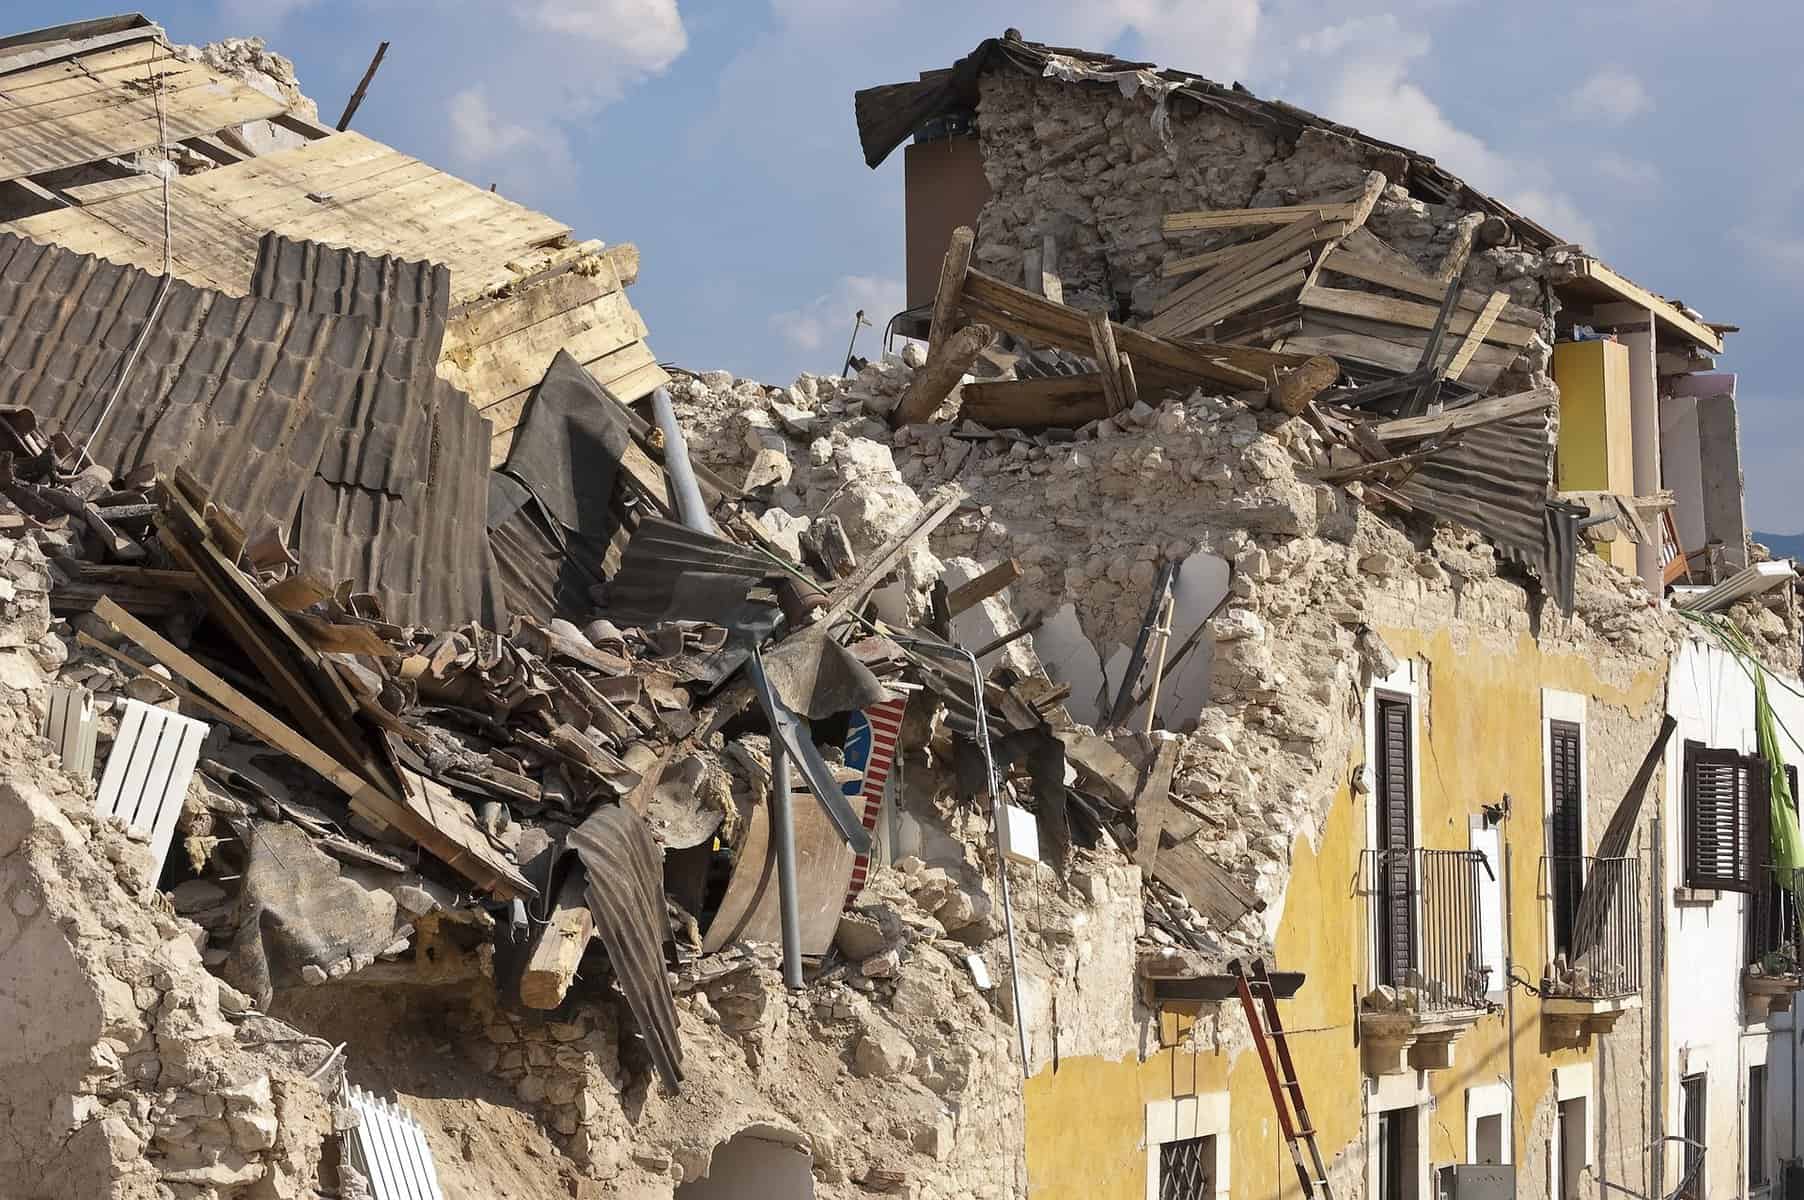 An earthquake destroyed stone building is shown.